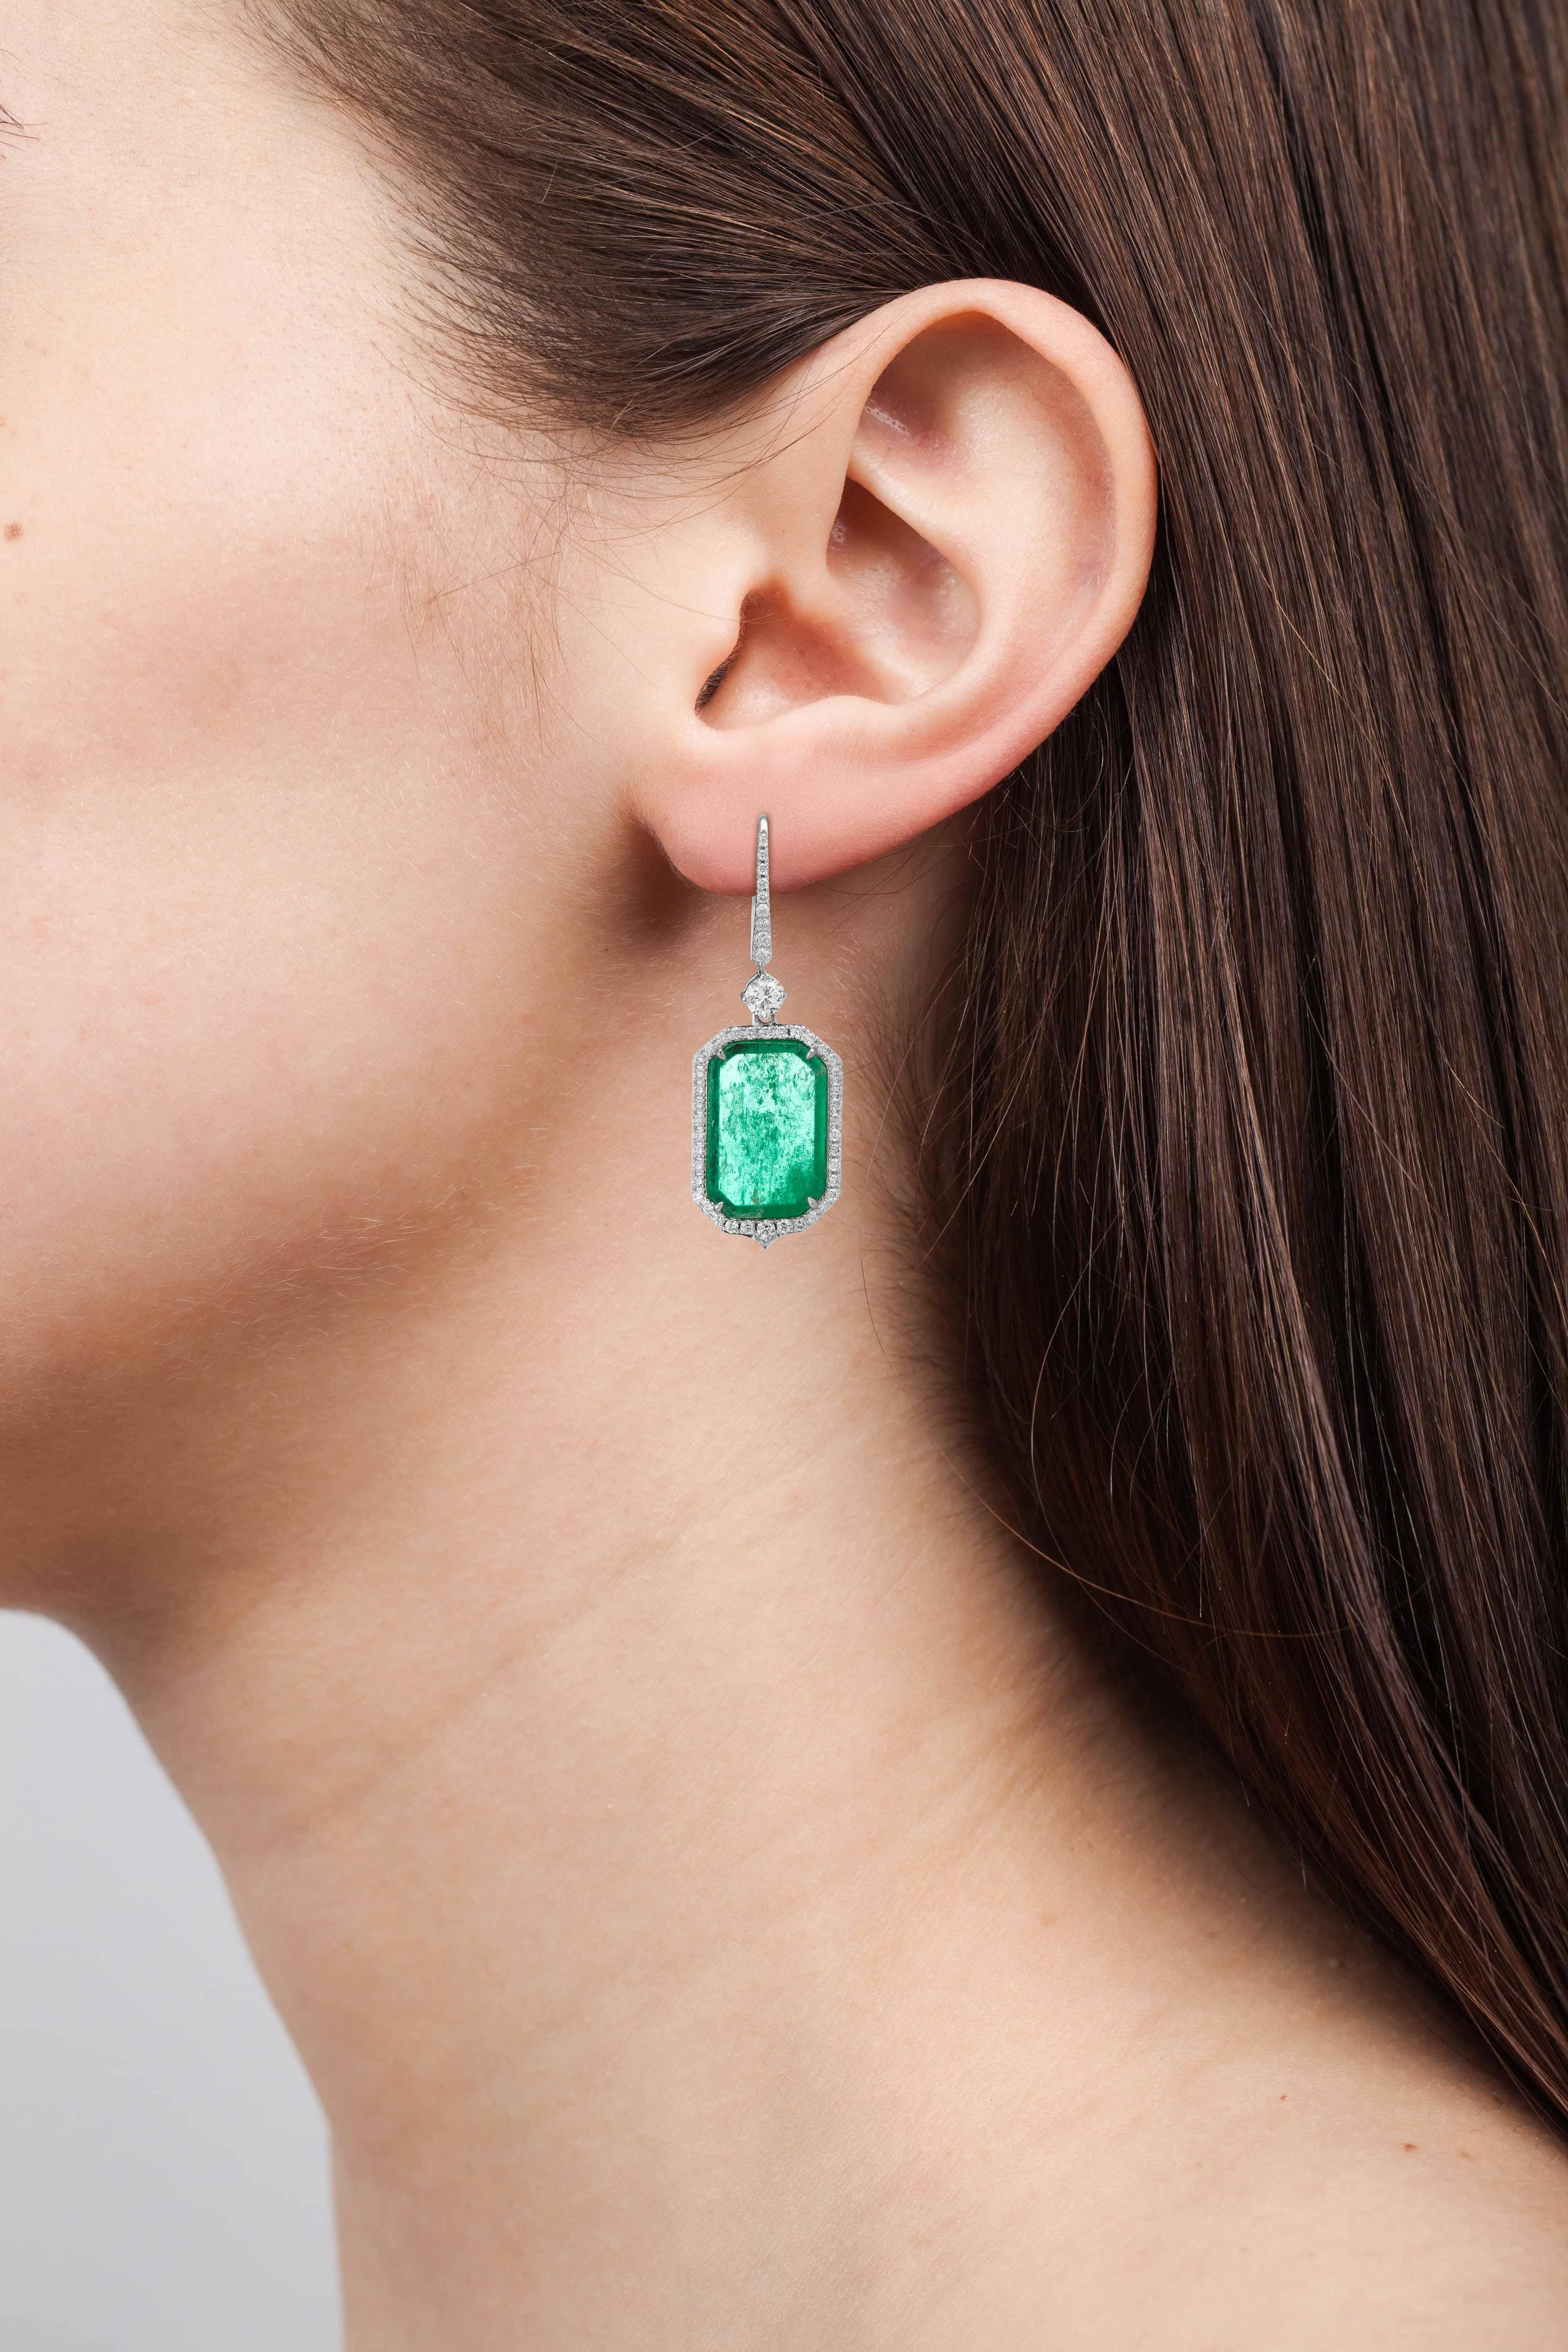 18 Karat white gold classic art deco Muzo Colombian emerald slices weighing 6.07 carats set accented by 0.79 carats of micro pave diamonds.

Muzo Emerald Colombia Heritage Atocha Earrings set with 6.07 carats Emerald

Atocha is inspired by a